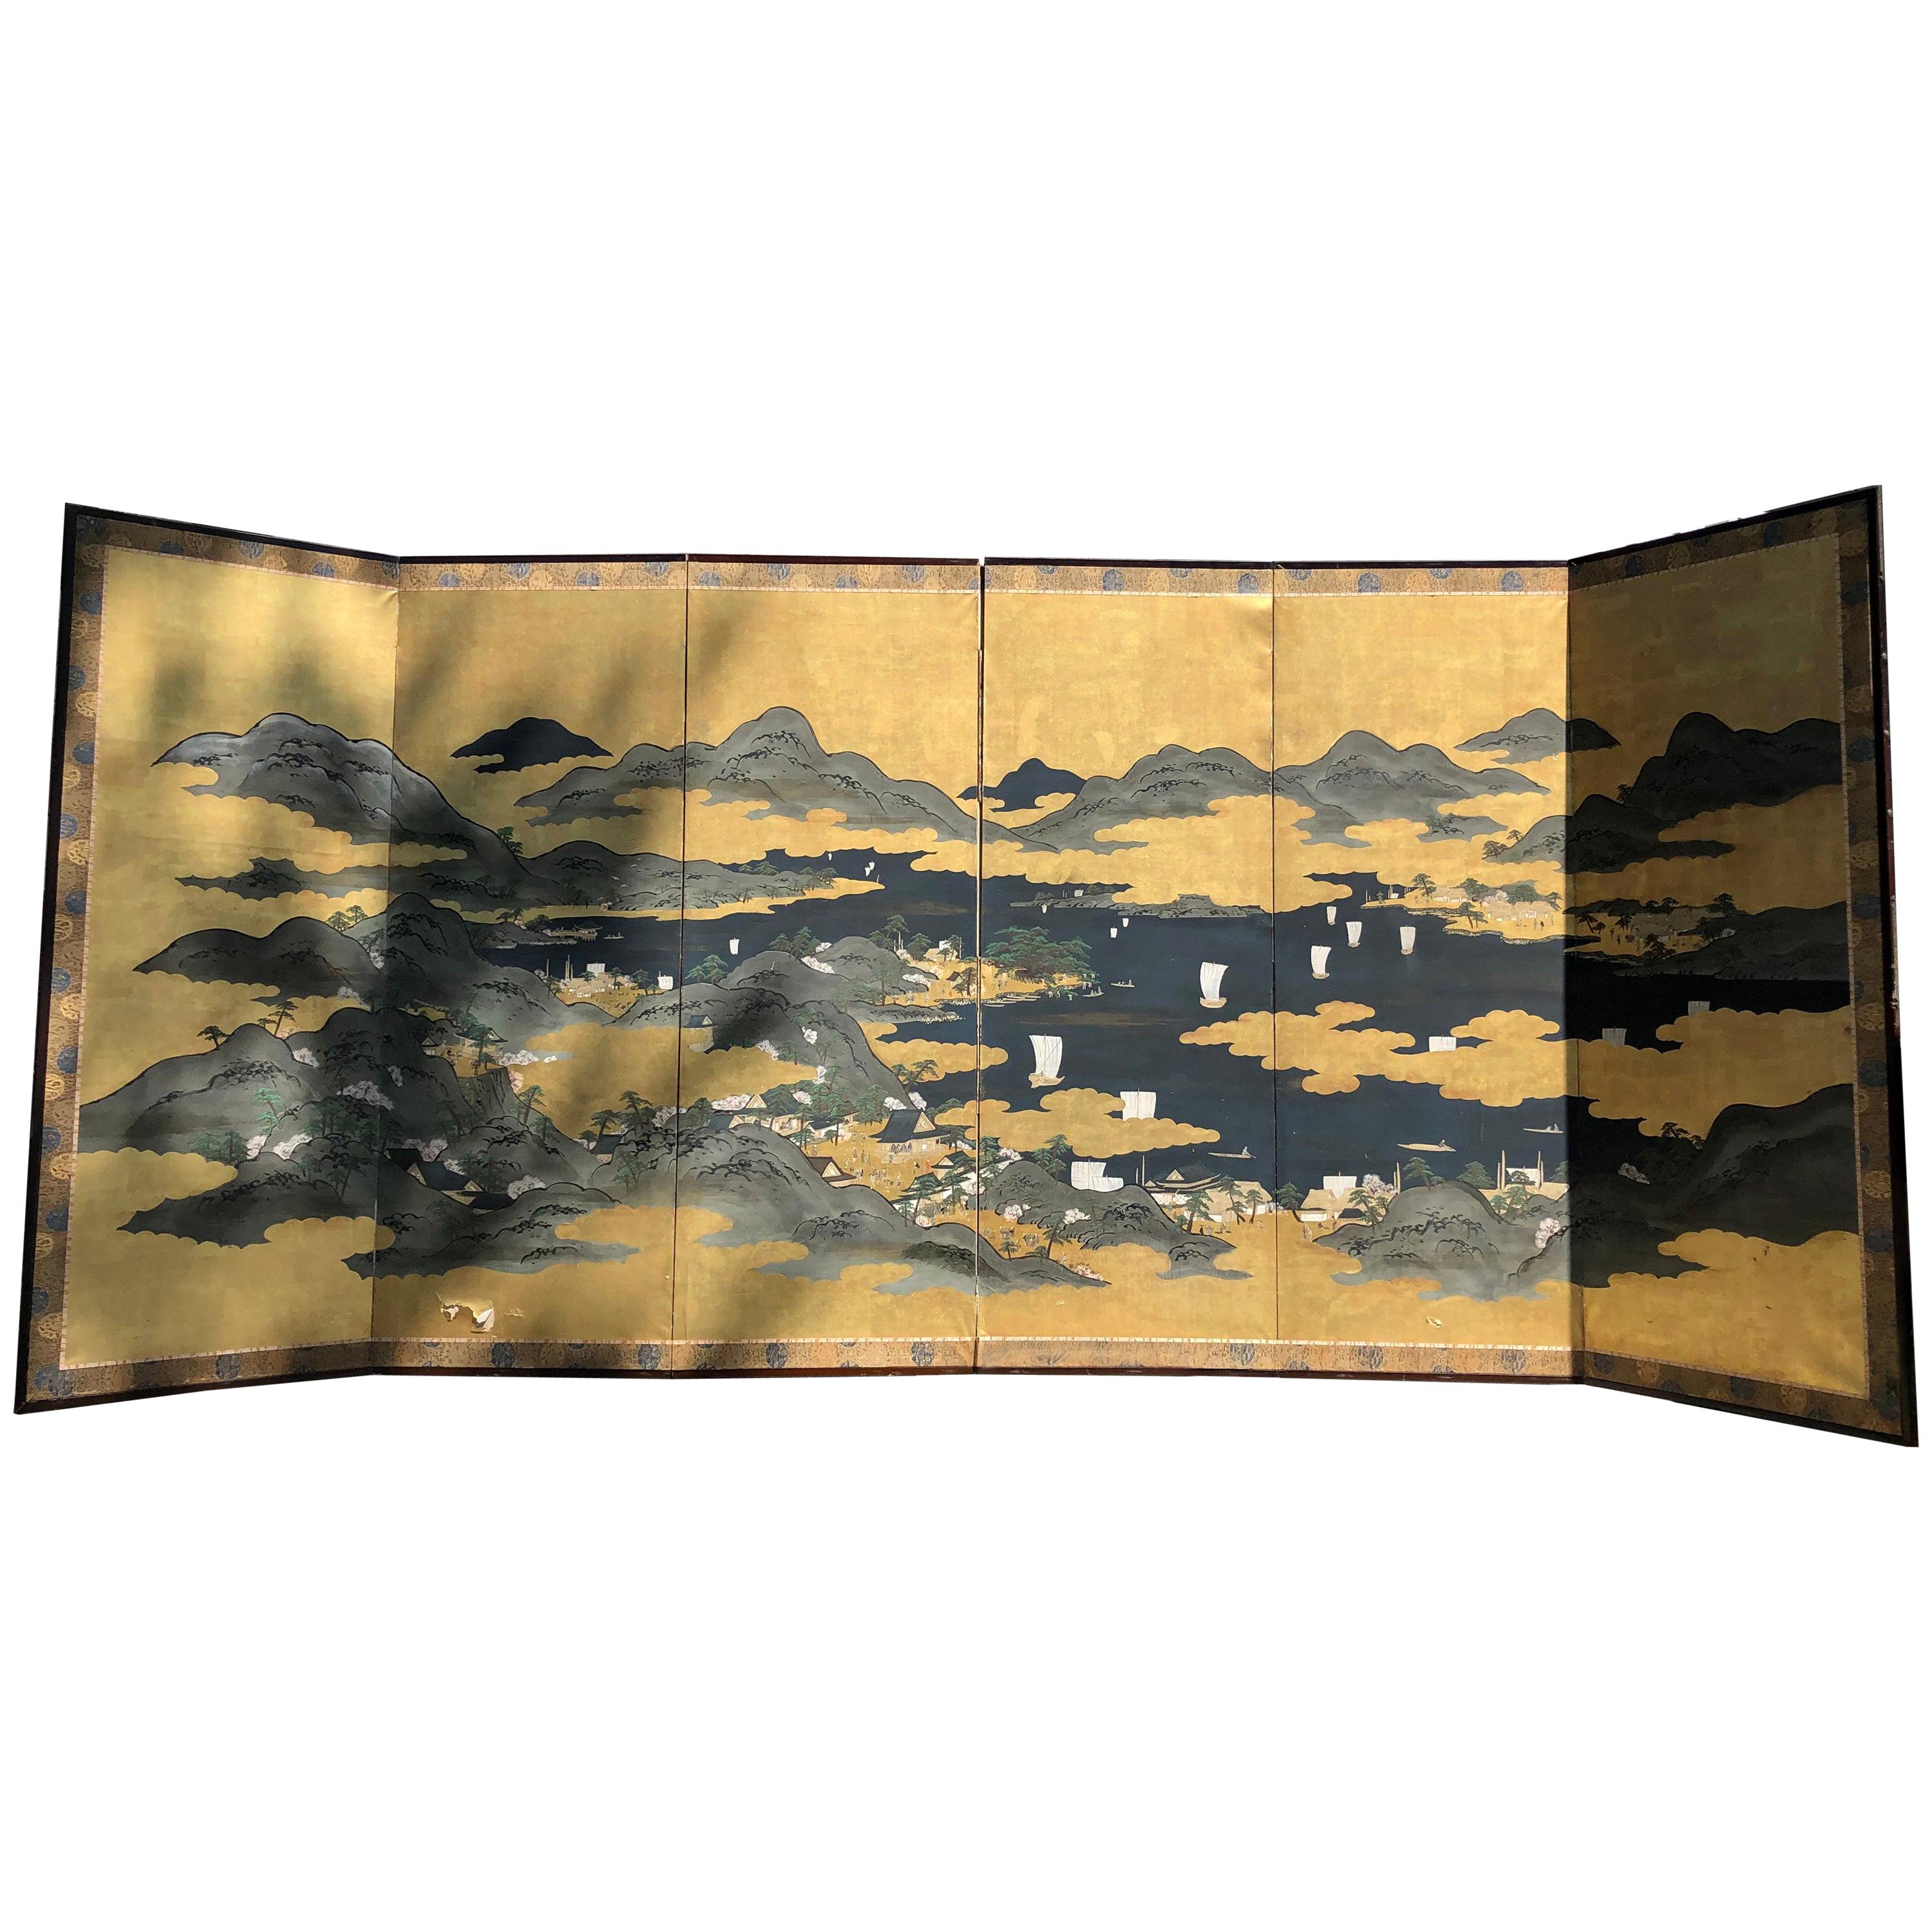 Japanese "Sail Boating on Blue Waters" Six-Panel Screen, 1930s-1940s